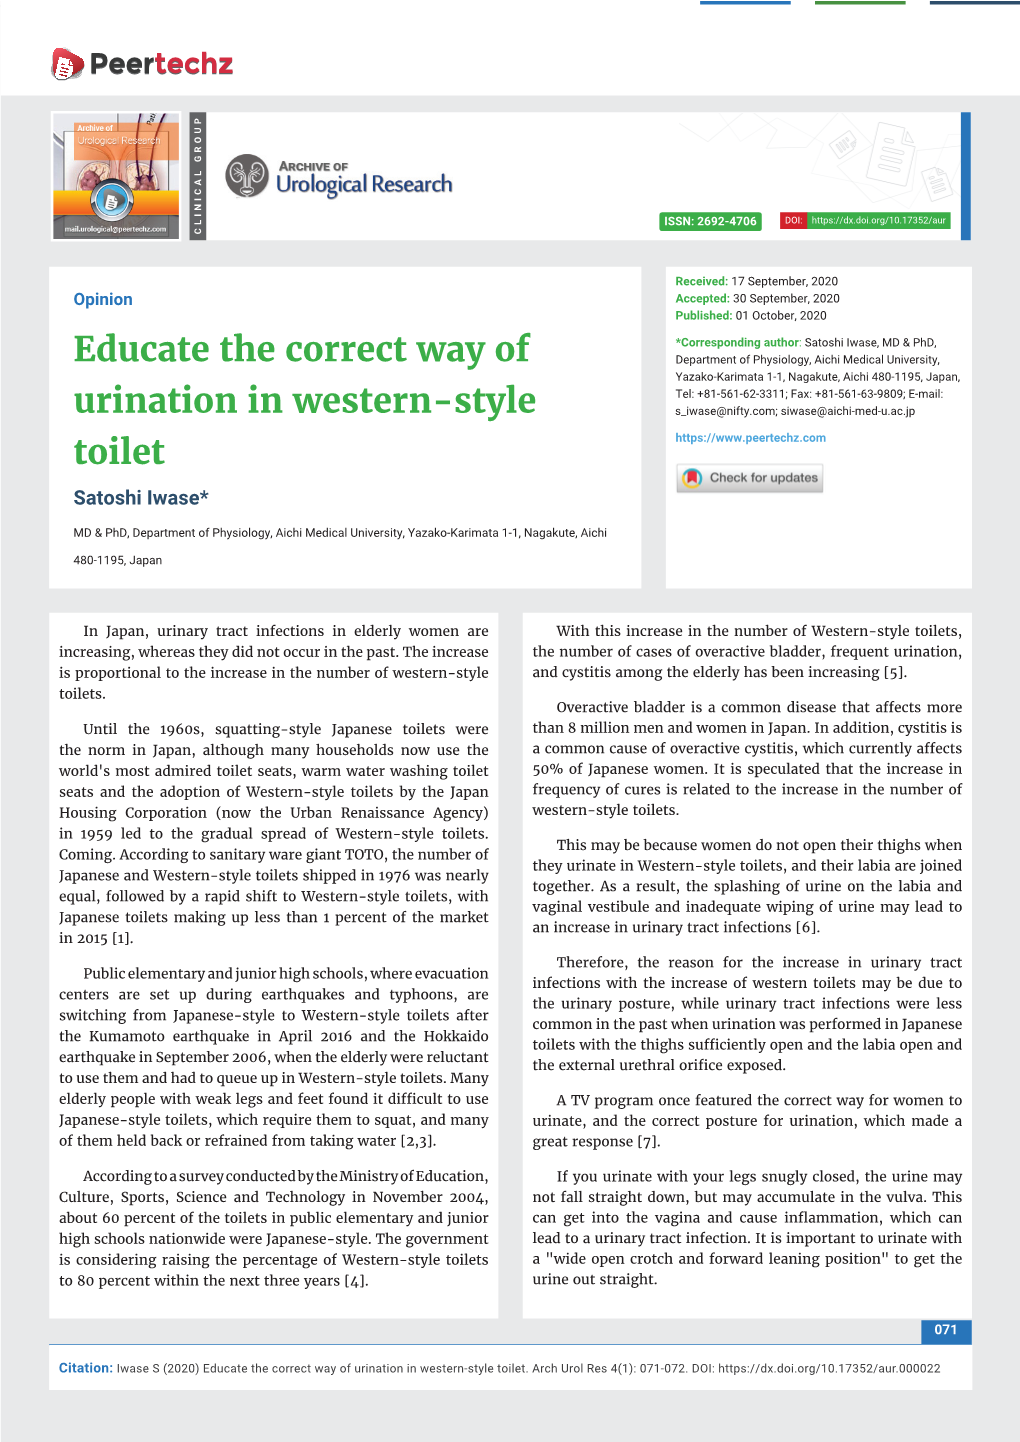 Educate the Correct Way of Urination in Western-Style Toilet